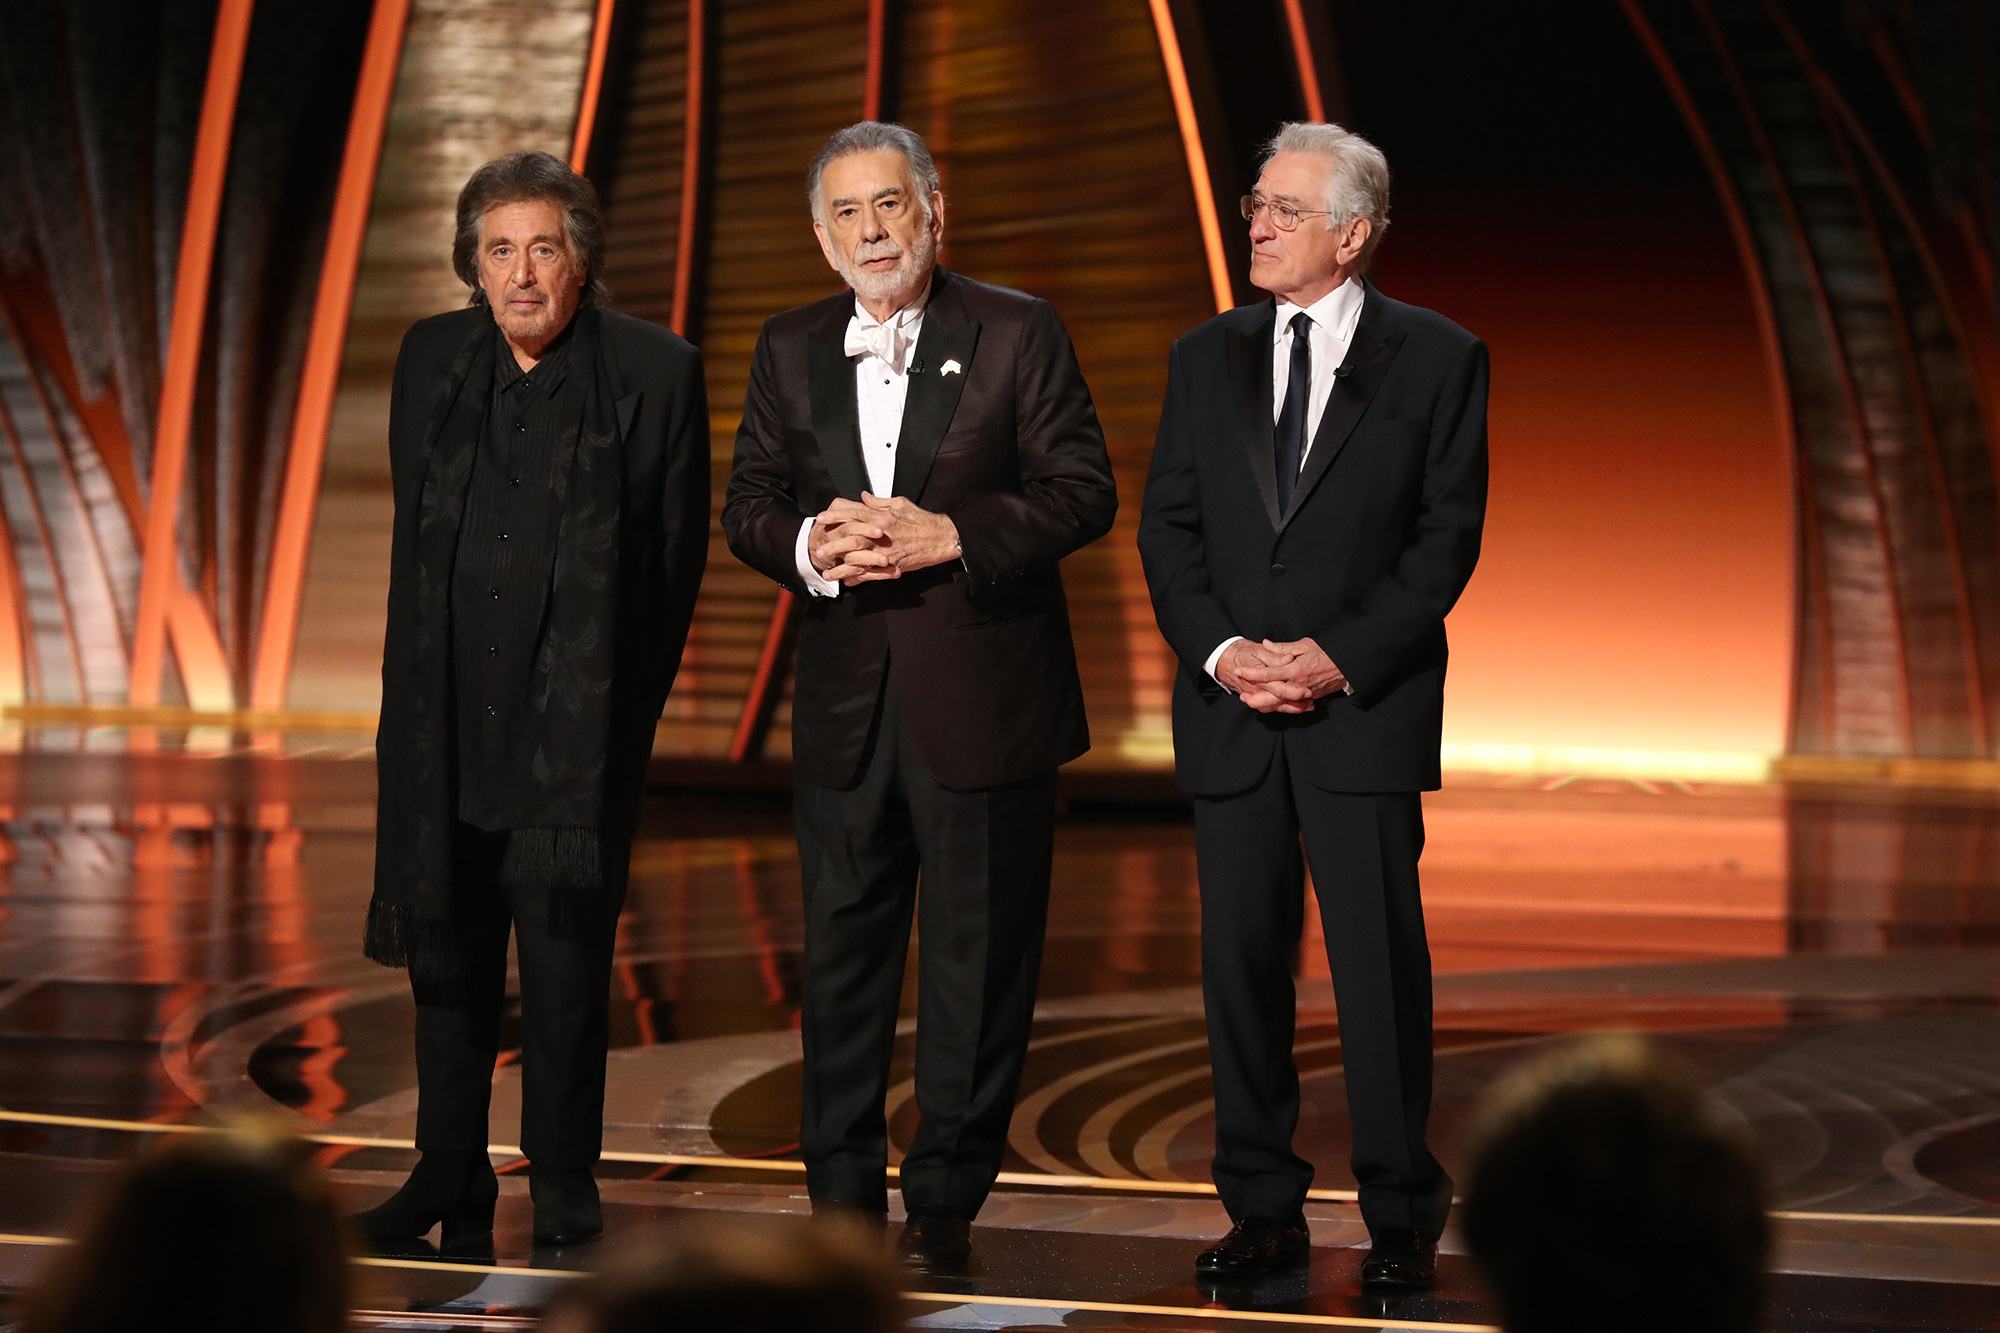 From left: Al Pacino, Francis Ford Coppola, and Robert De Niro speak onstage during the 94th Annual Academy Awards.